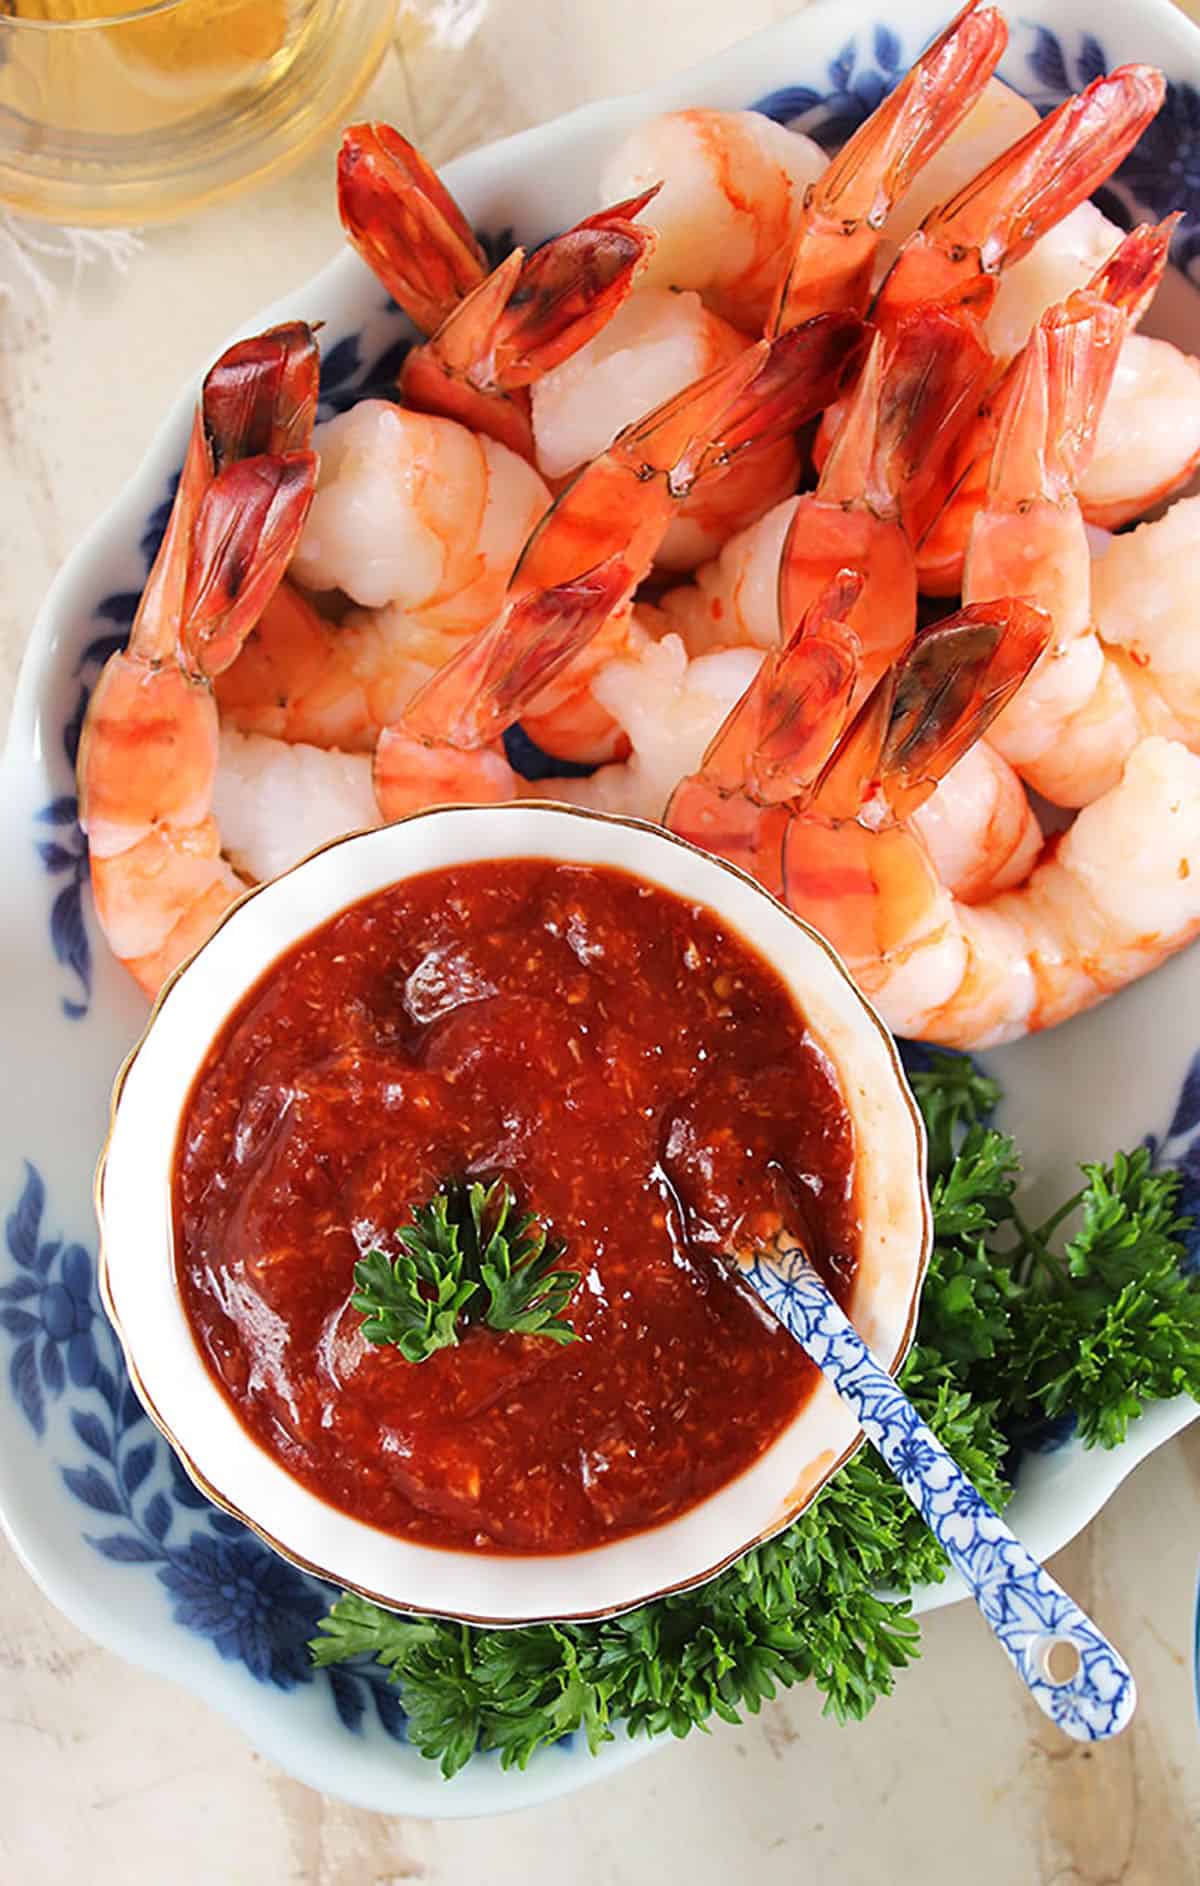 Overhead shot of homemade cocktail sauce and a pile of shrimp in a blue and white plate